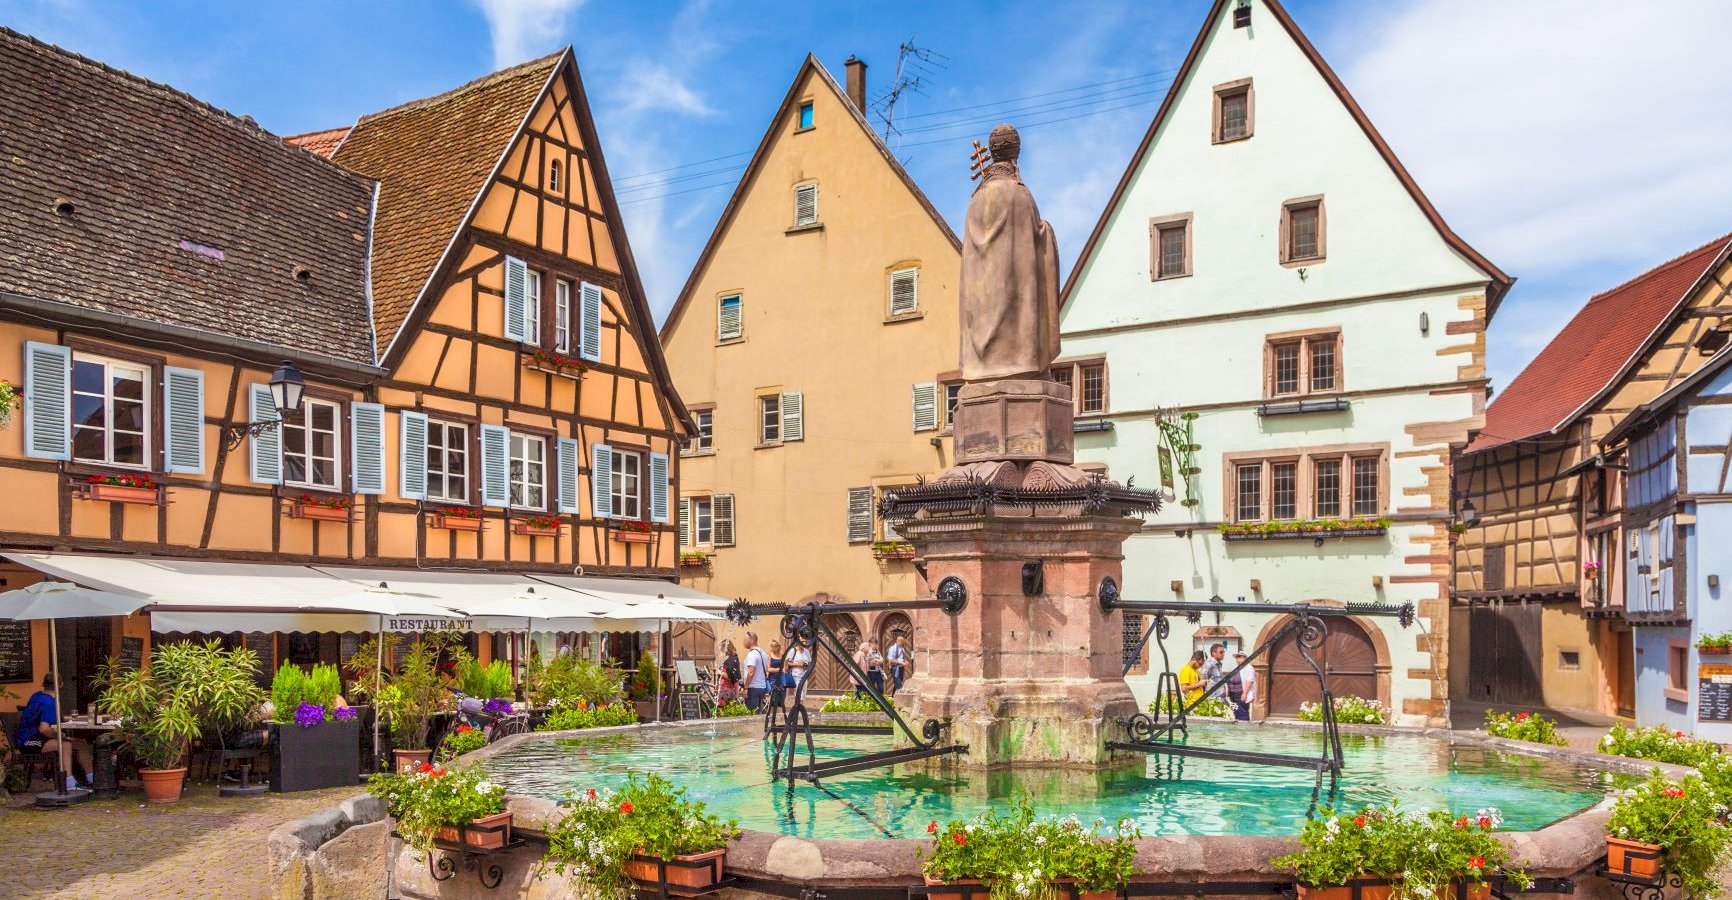 Ophorus Tours - 4 Days Alsace Shared Travel Package - 4* Hotel Option